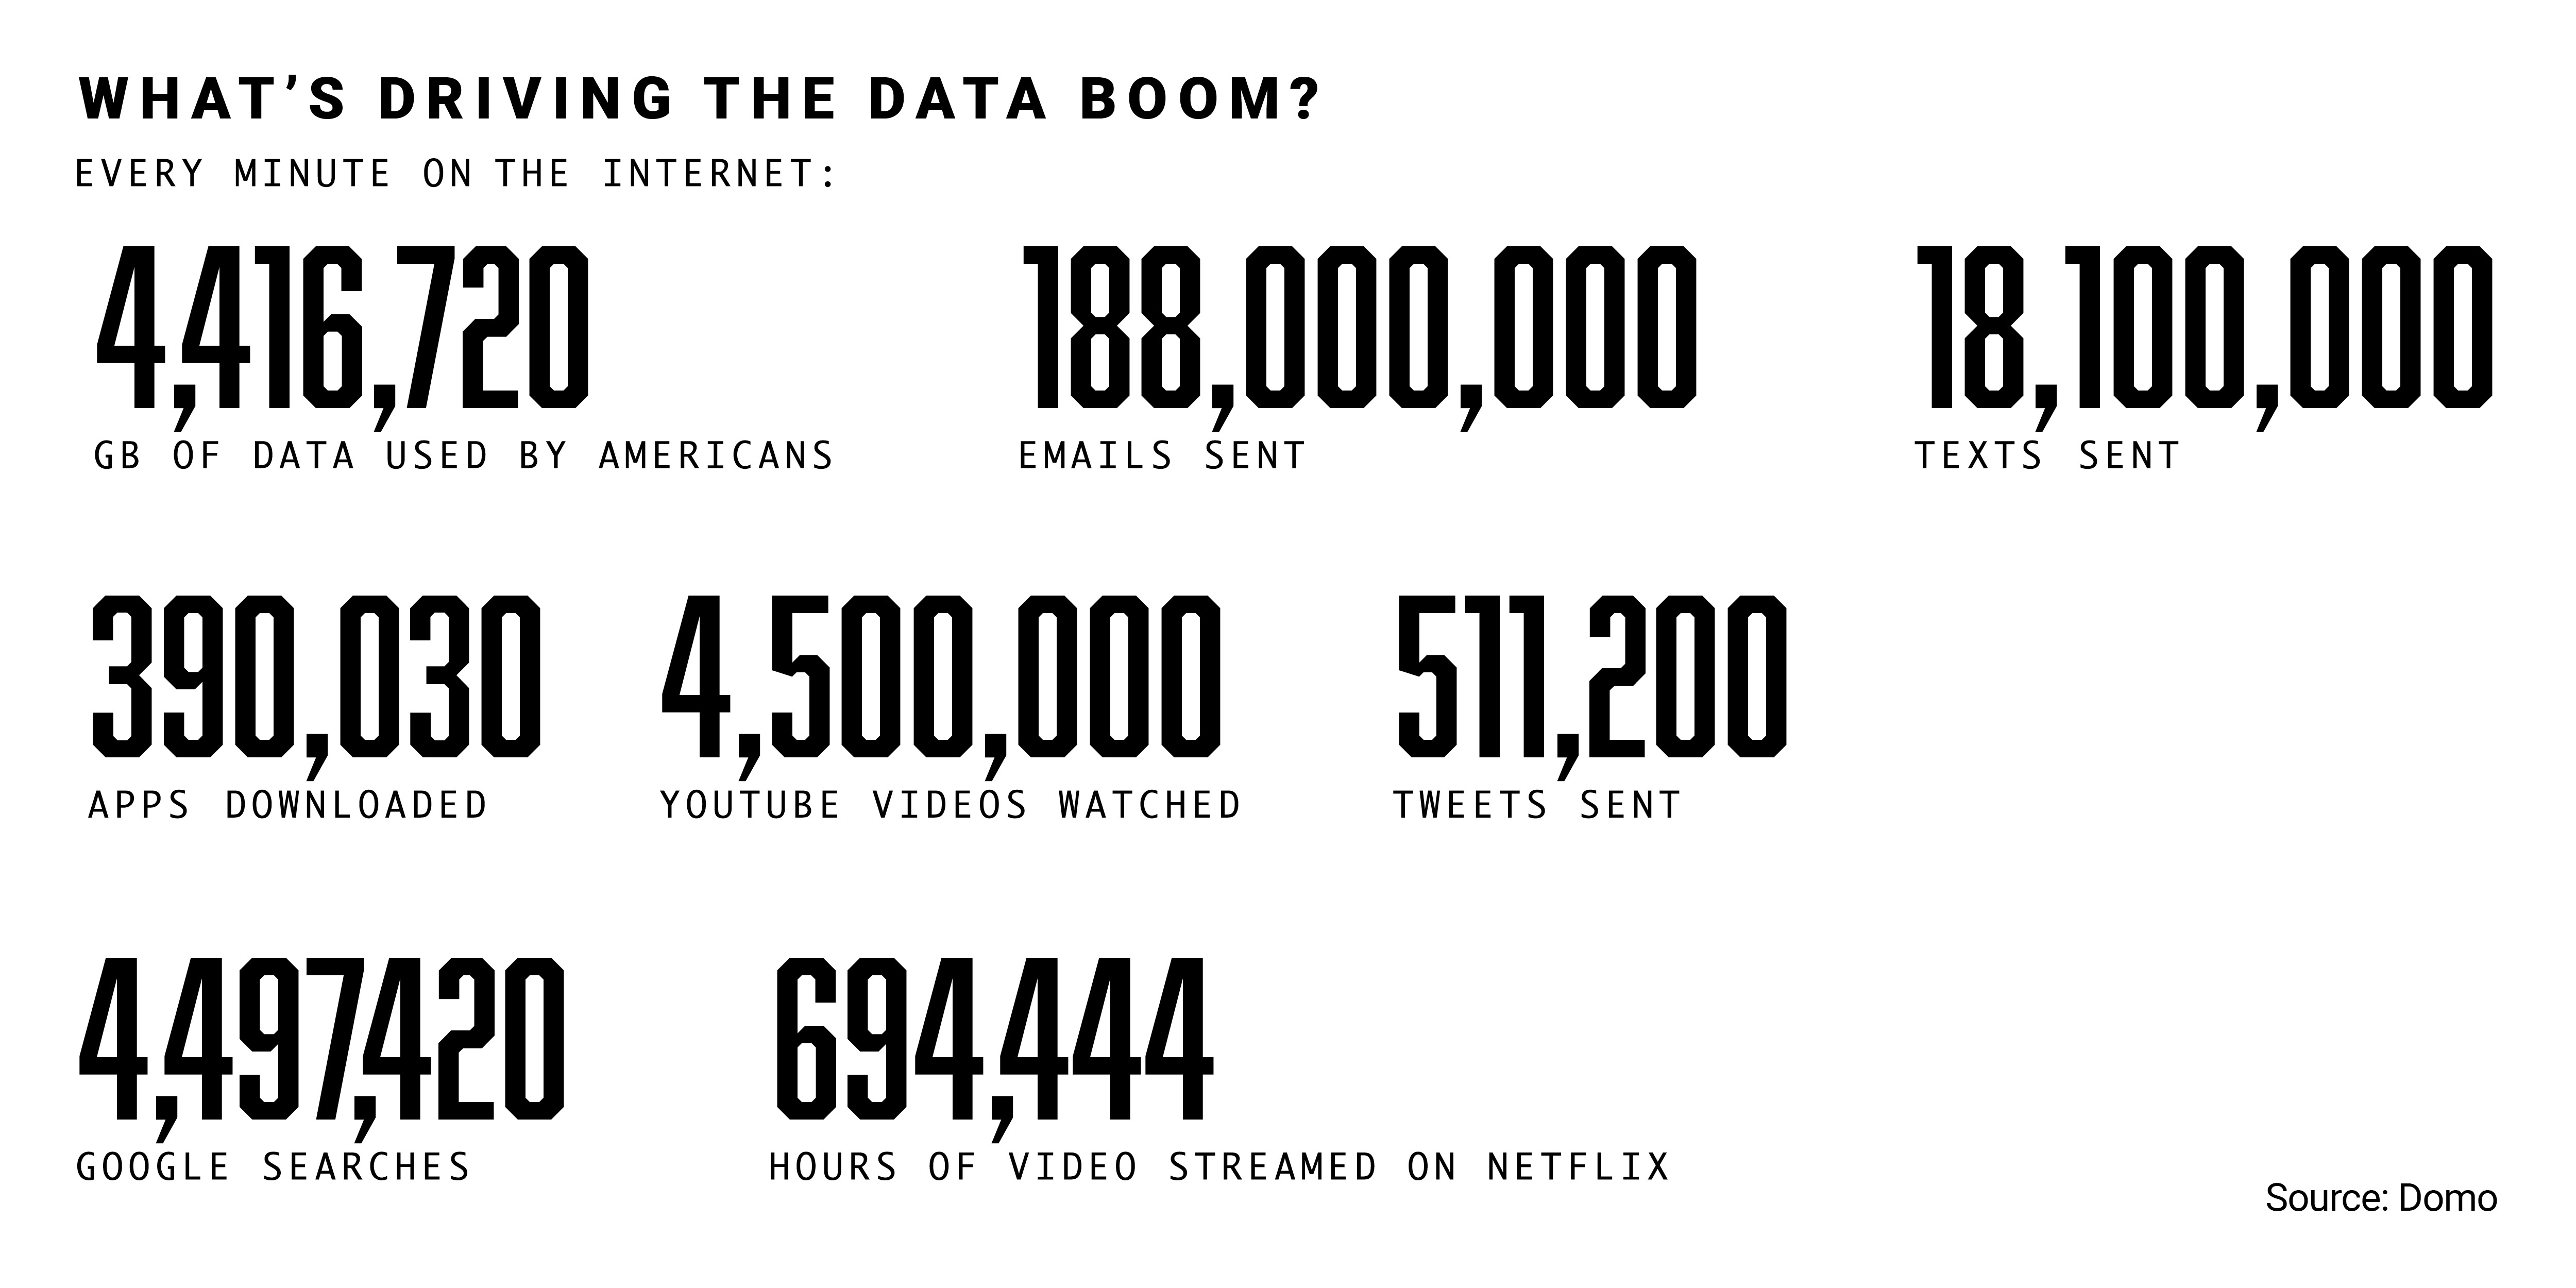 What's Driving the Data Boom